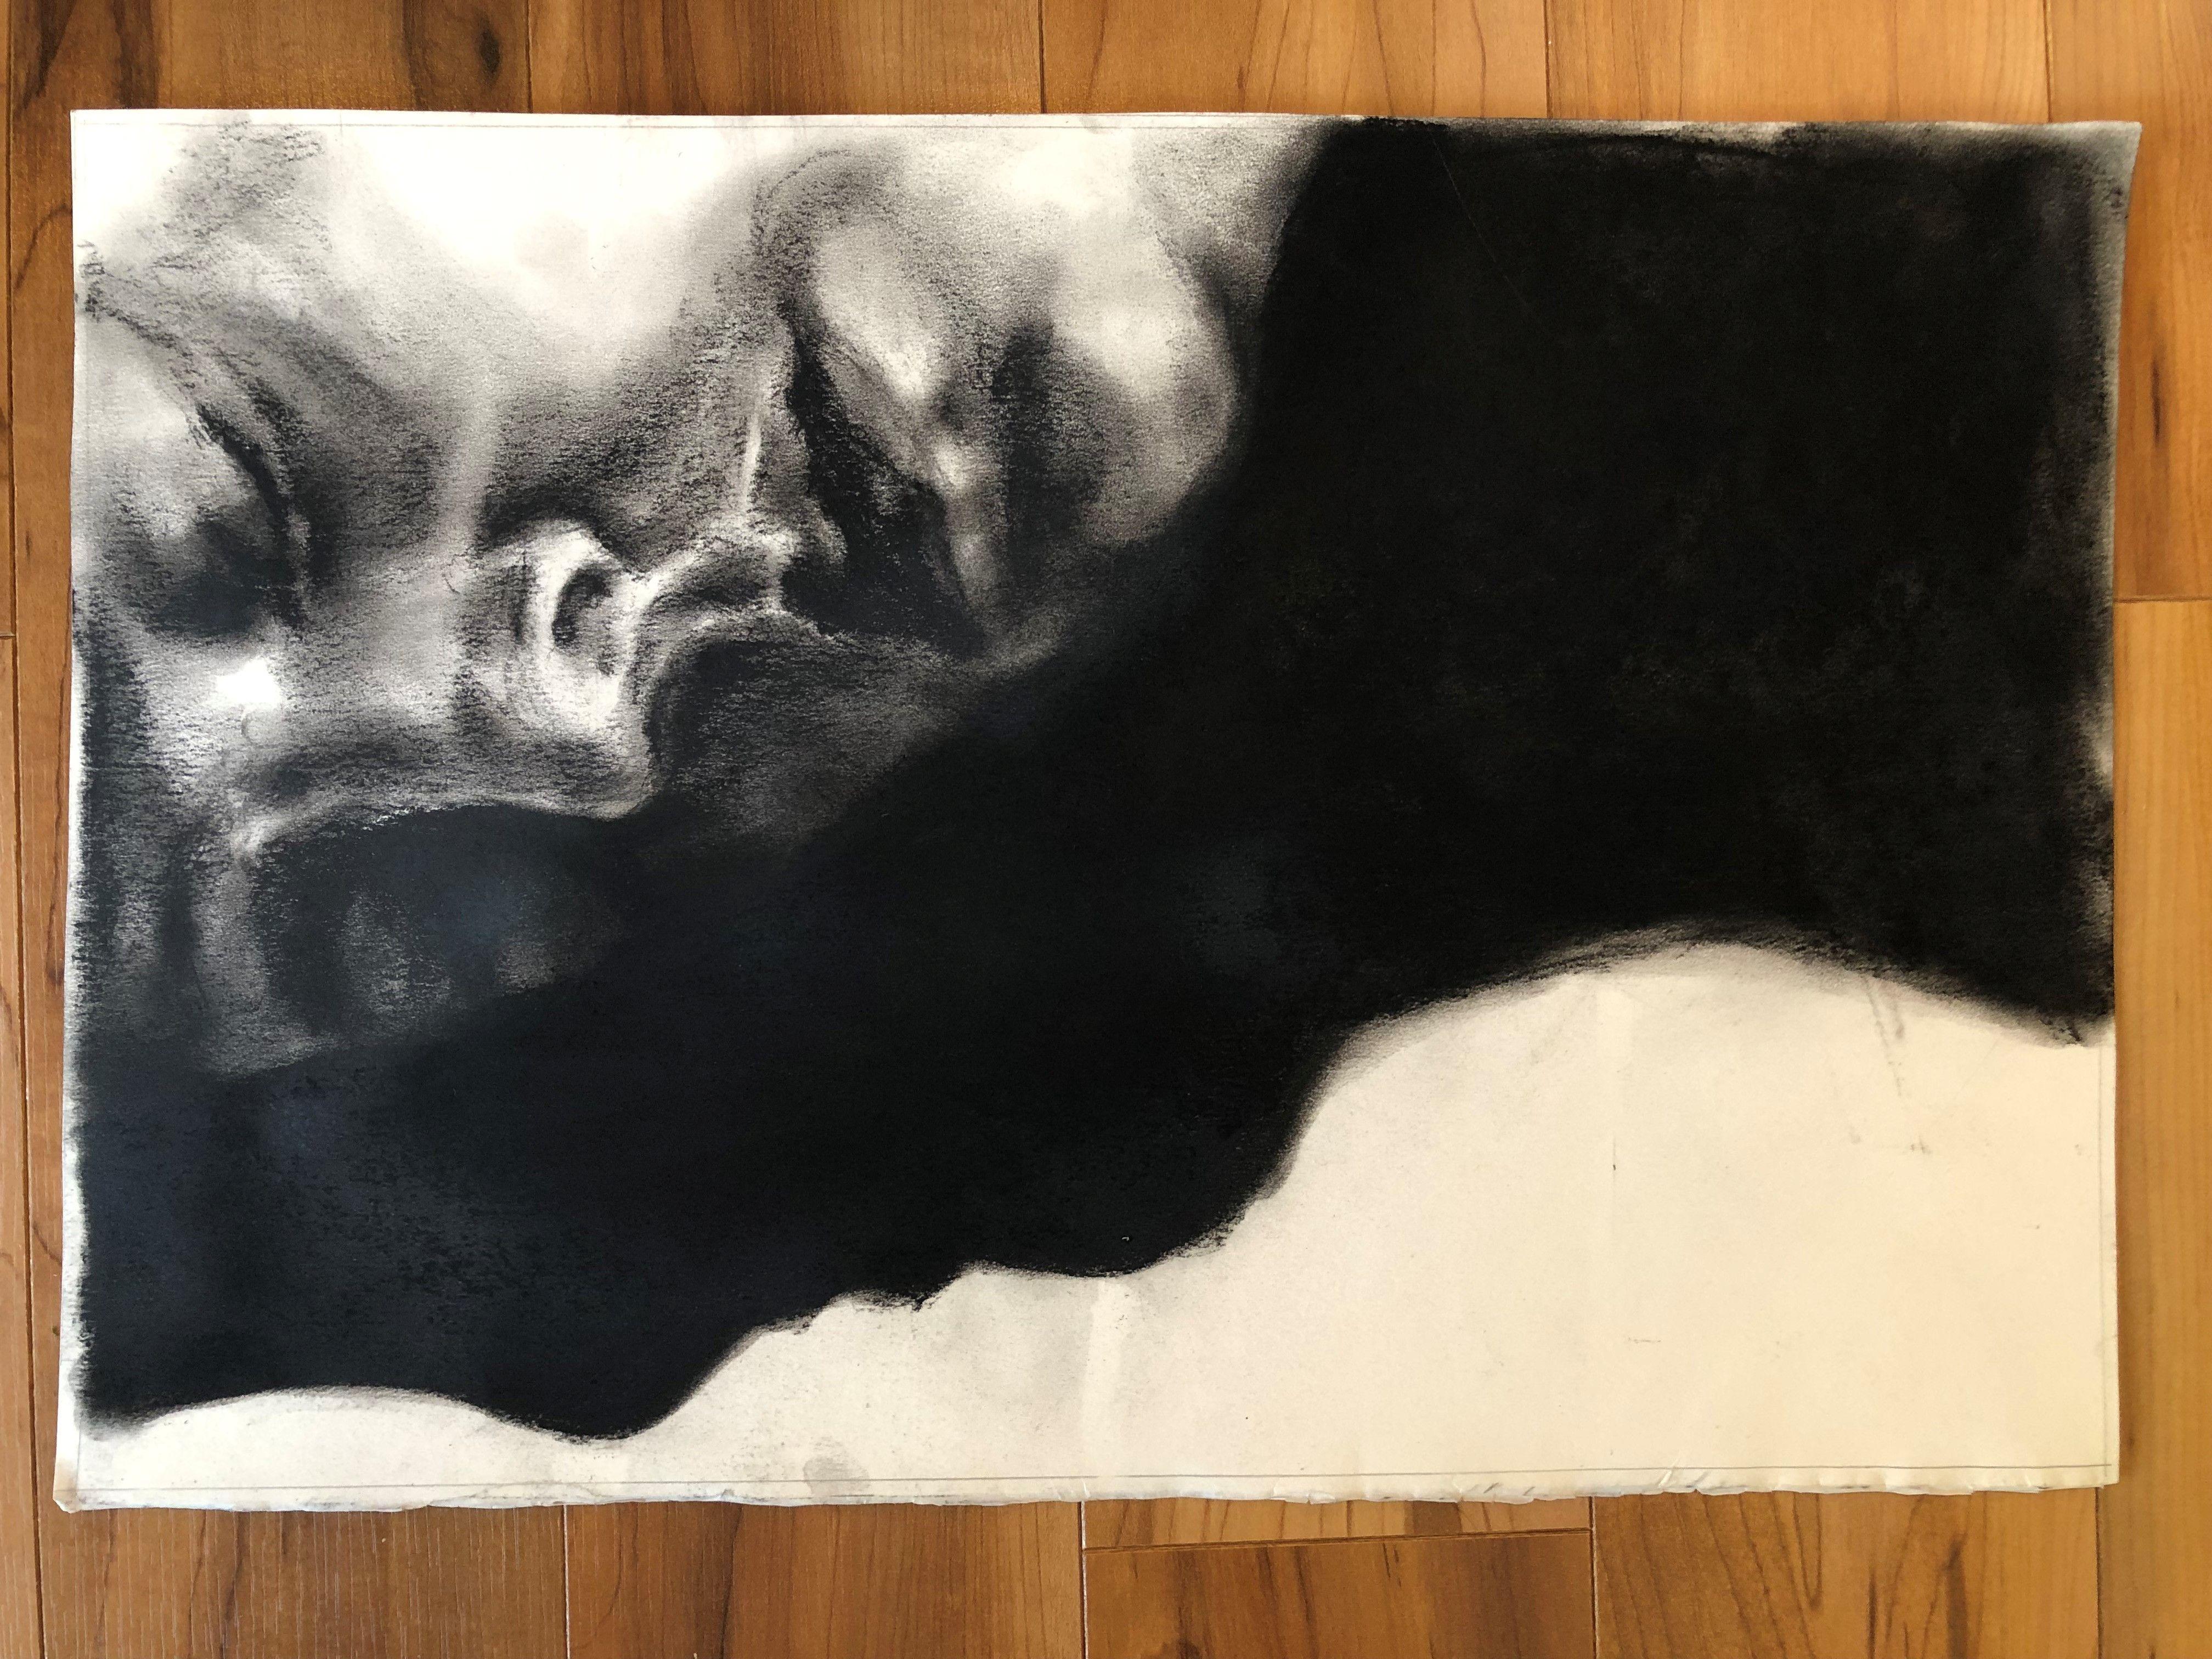 Fire not lost, Drawing, Charcoal on Paper - Art by Emily Redd